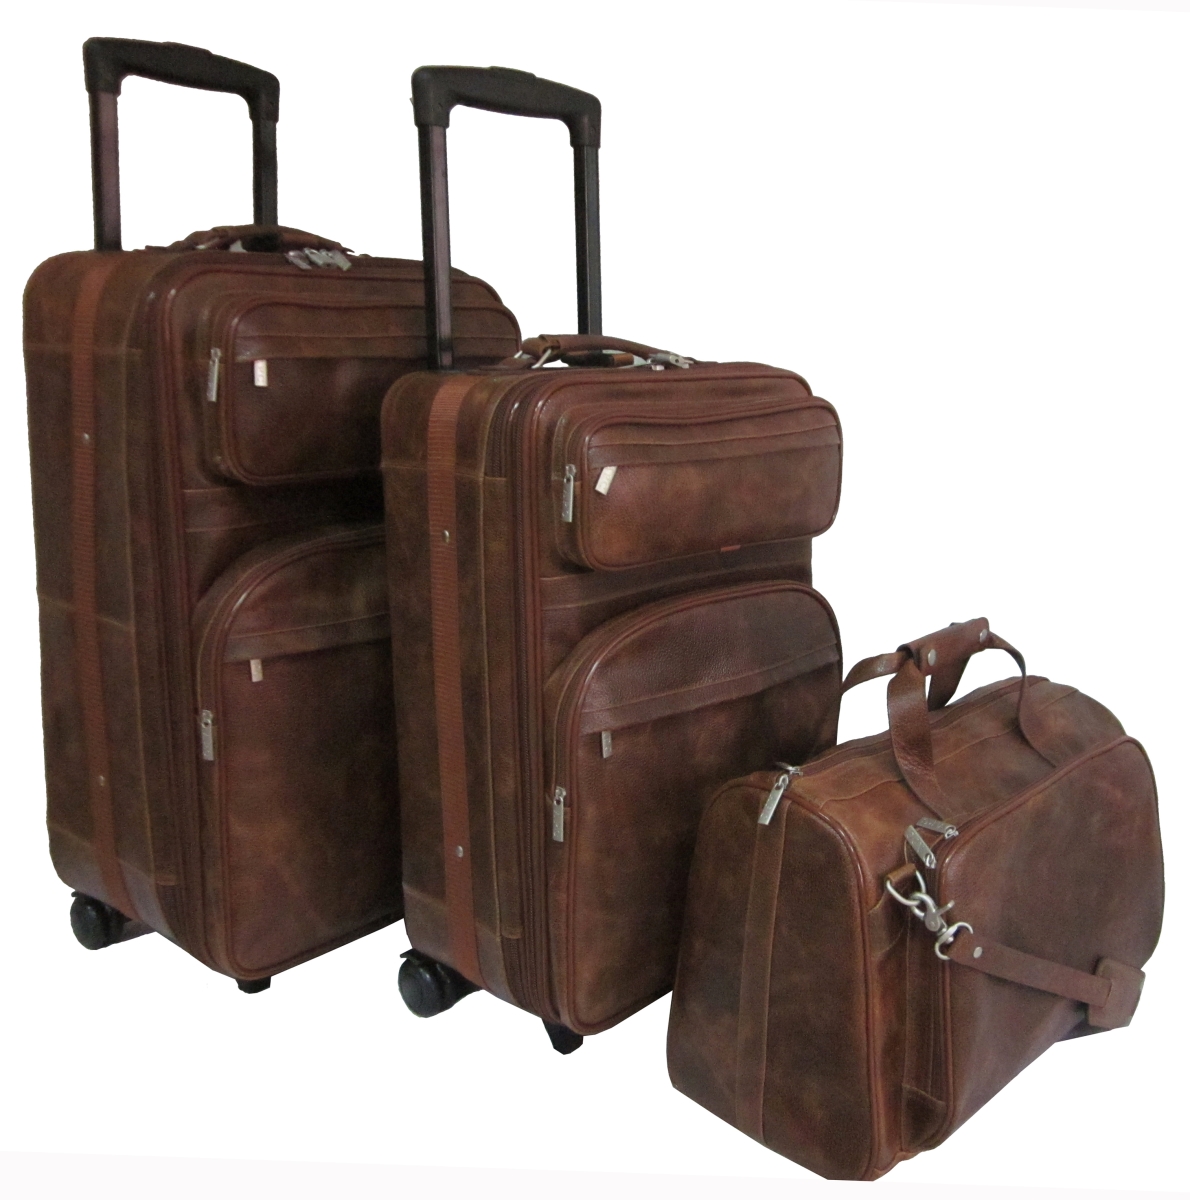 Picture of AmeriLeather 8003-4 Leather Traveler Set, Waxy Brown - 3 Piece